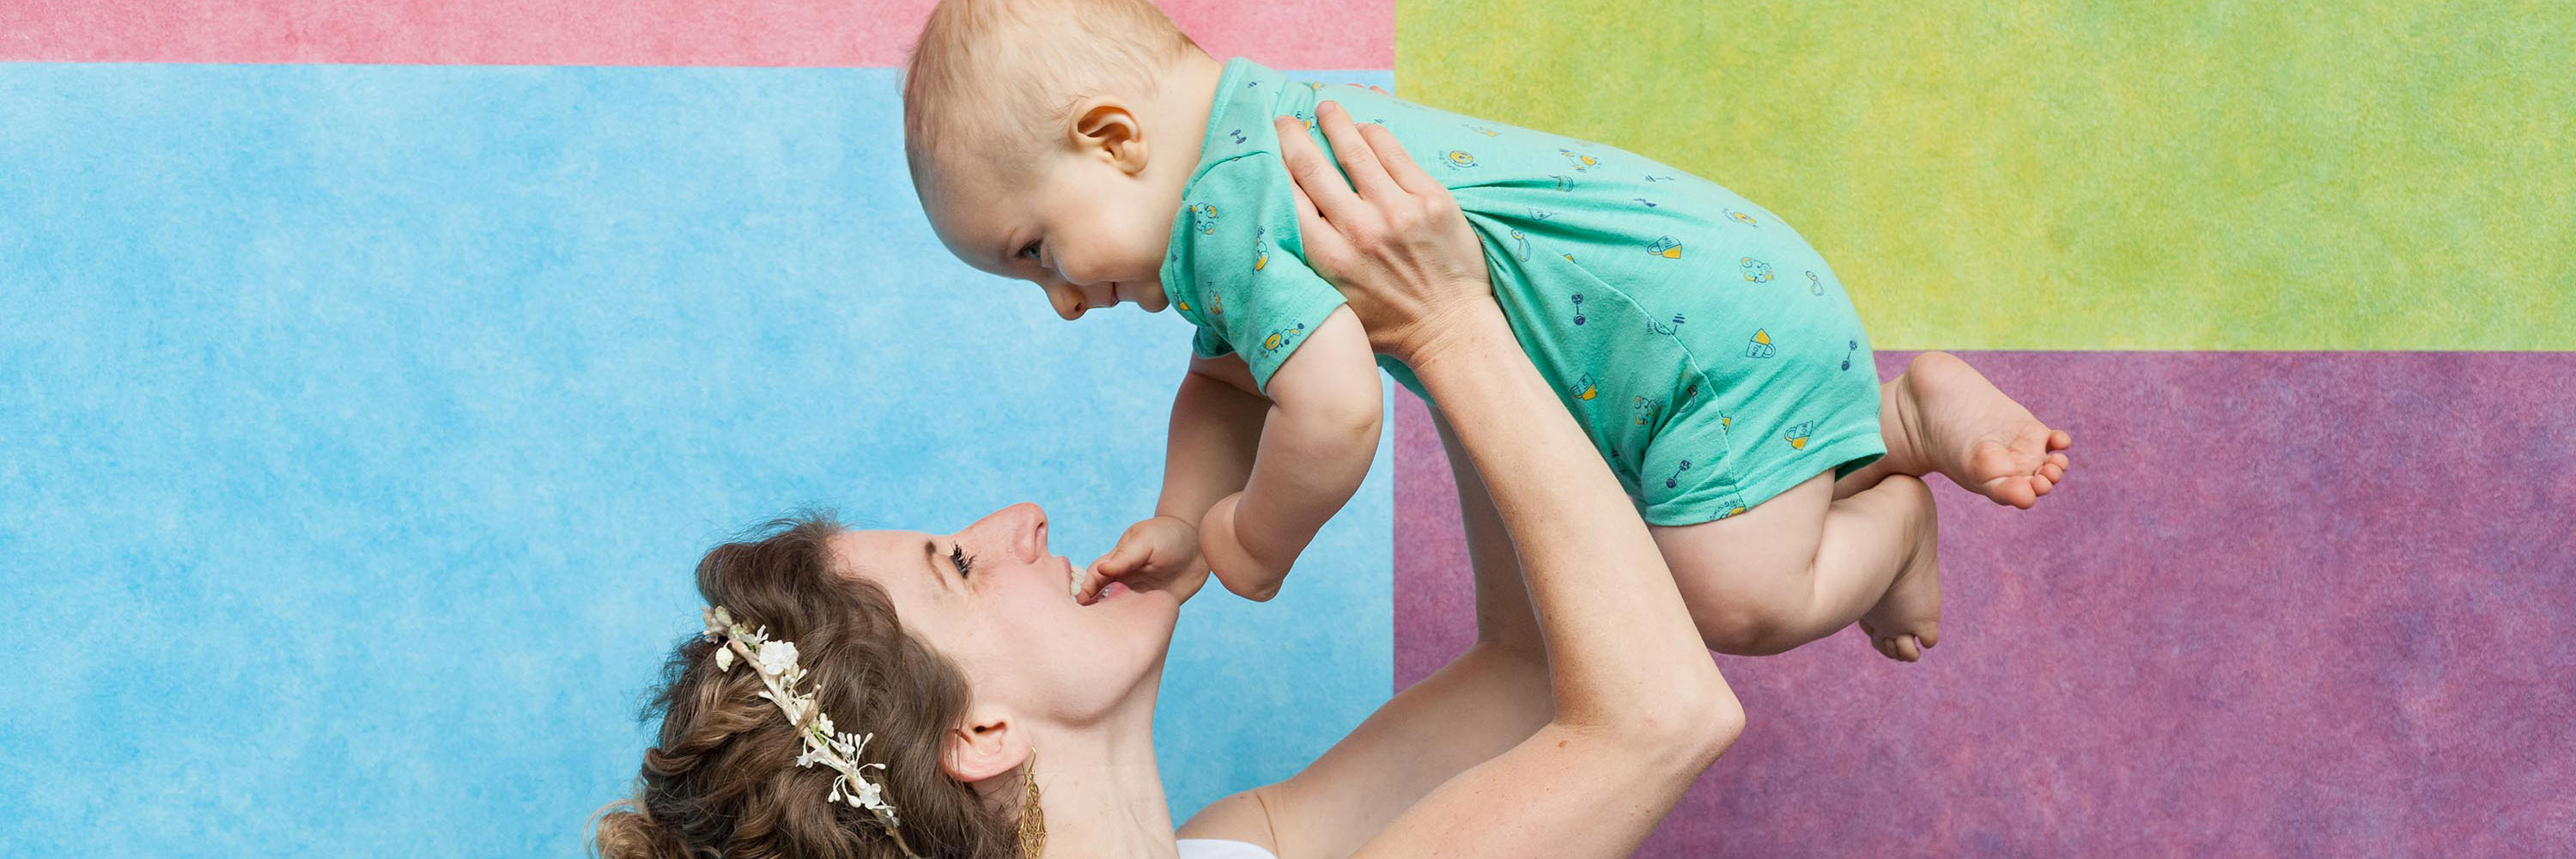 A woman holds a baby aloft in front of a painted wall.